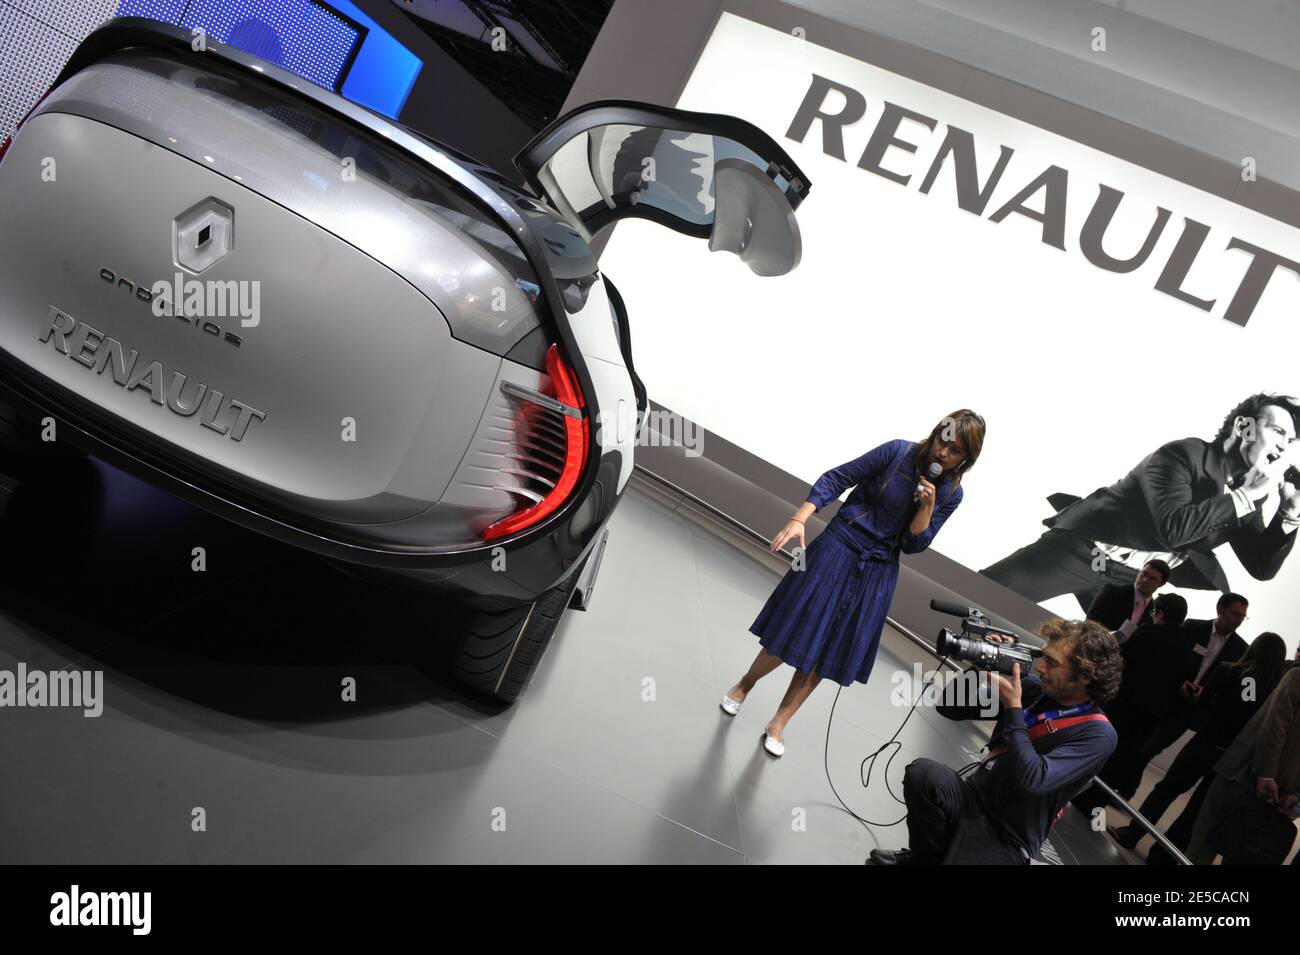 General view of the Renault stand with the new car model Ondelios during the press days at the International Paris Motor Show, in Paris,France on October 03, 2008. Photo by Giancarlo Gorassini/ABACAPRESS.COM Stock Photo